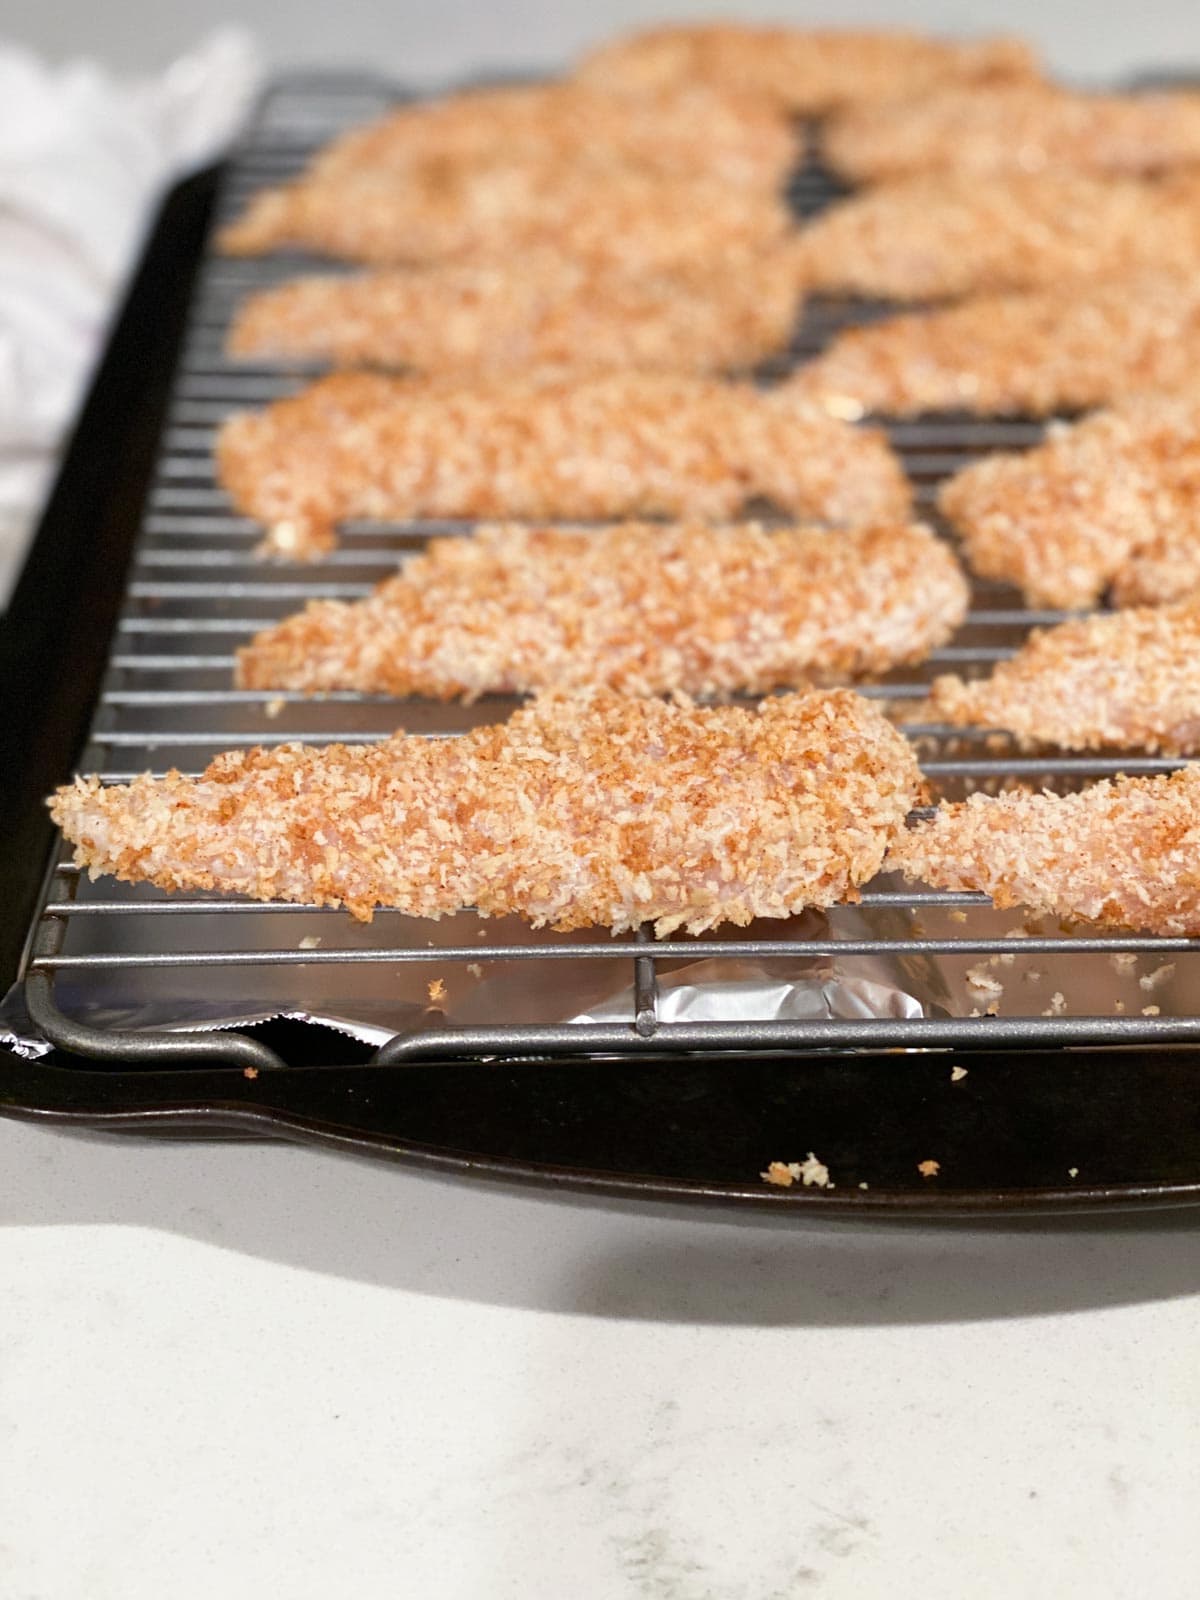 Chicken tenders lined up on a baking rack.